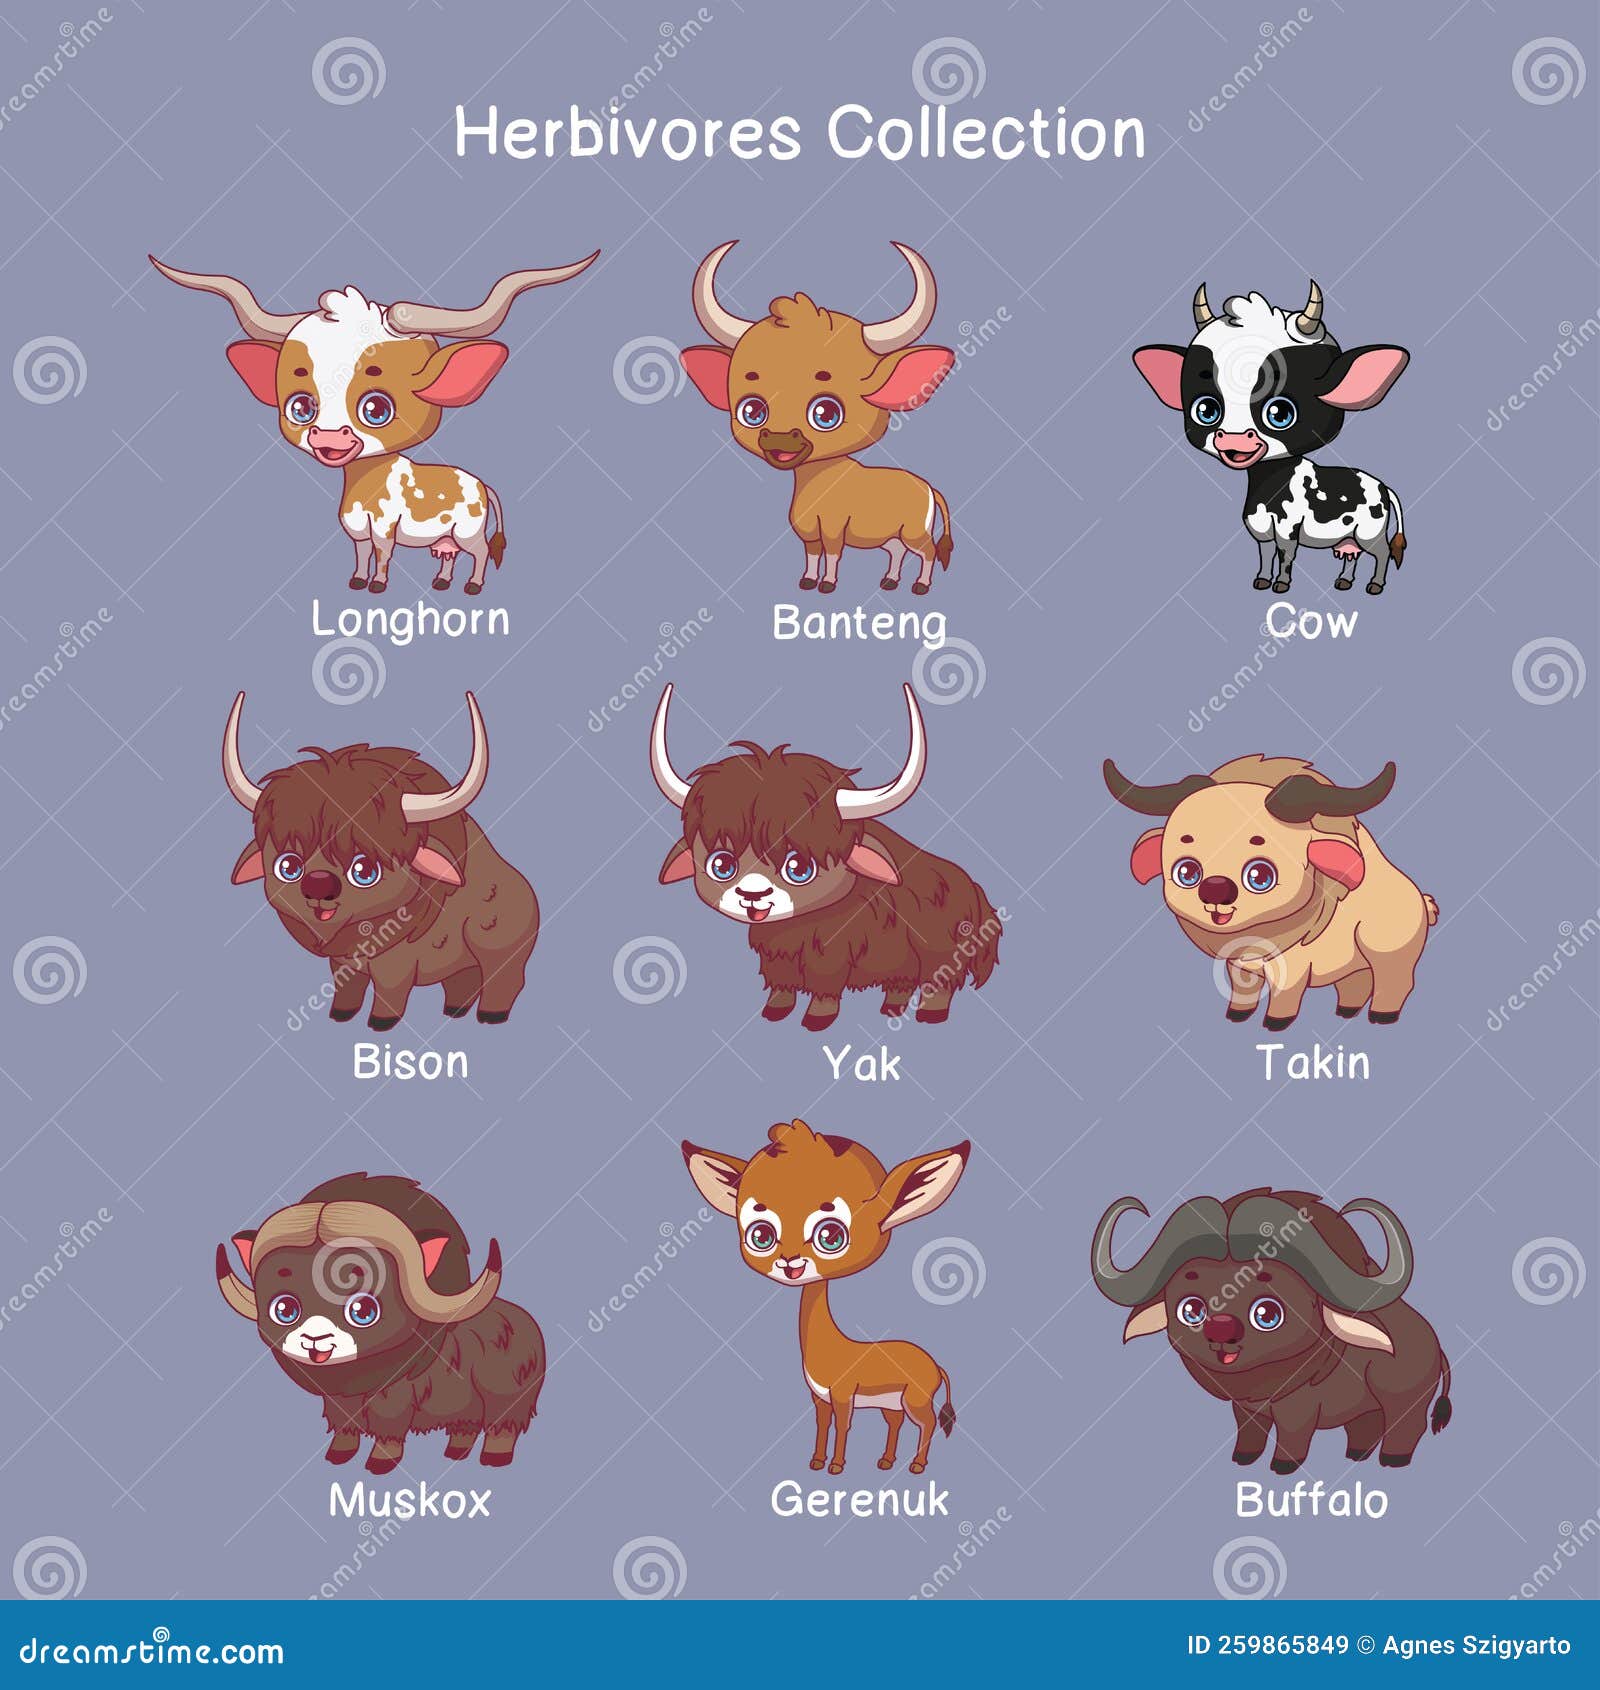 collection of herbivores with name text